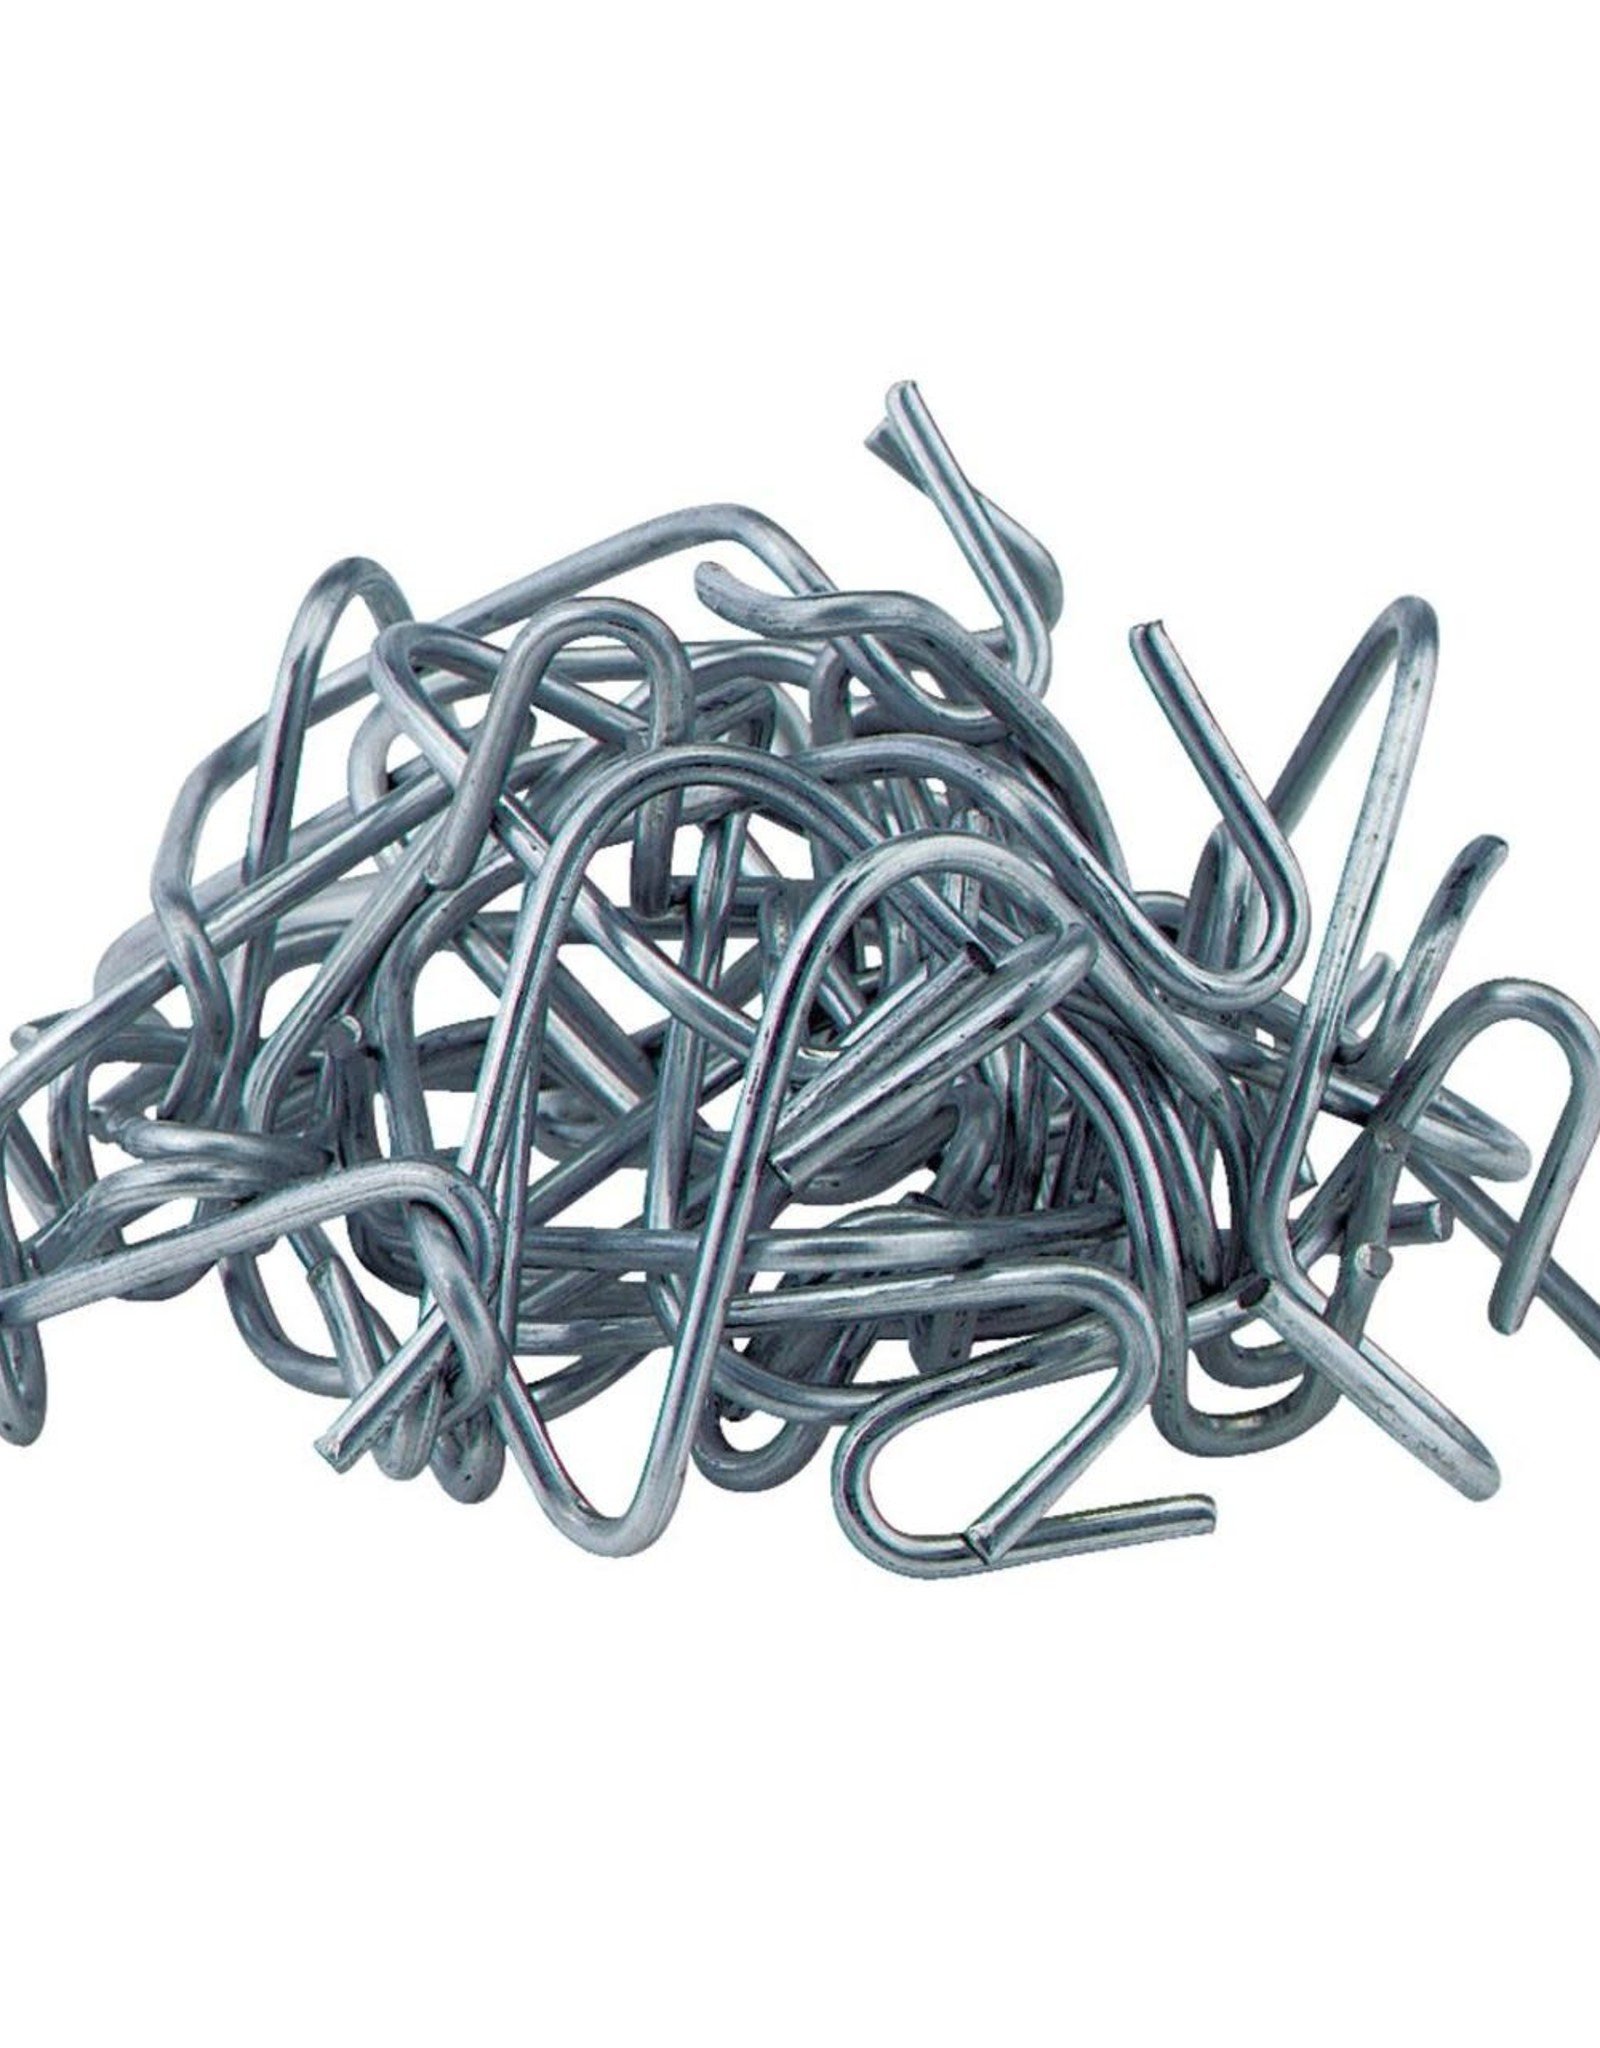 T-Post Clips, 2-1/4 in. Opening, 1000 Count Box